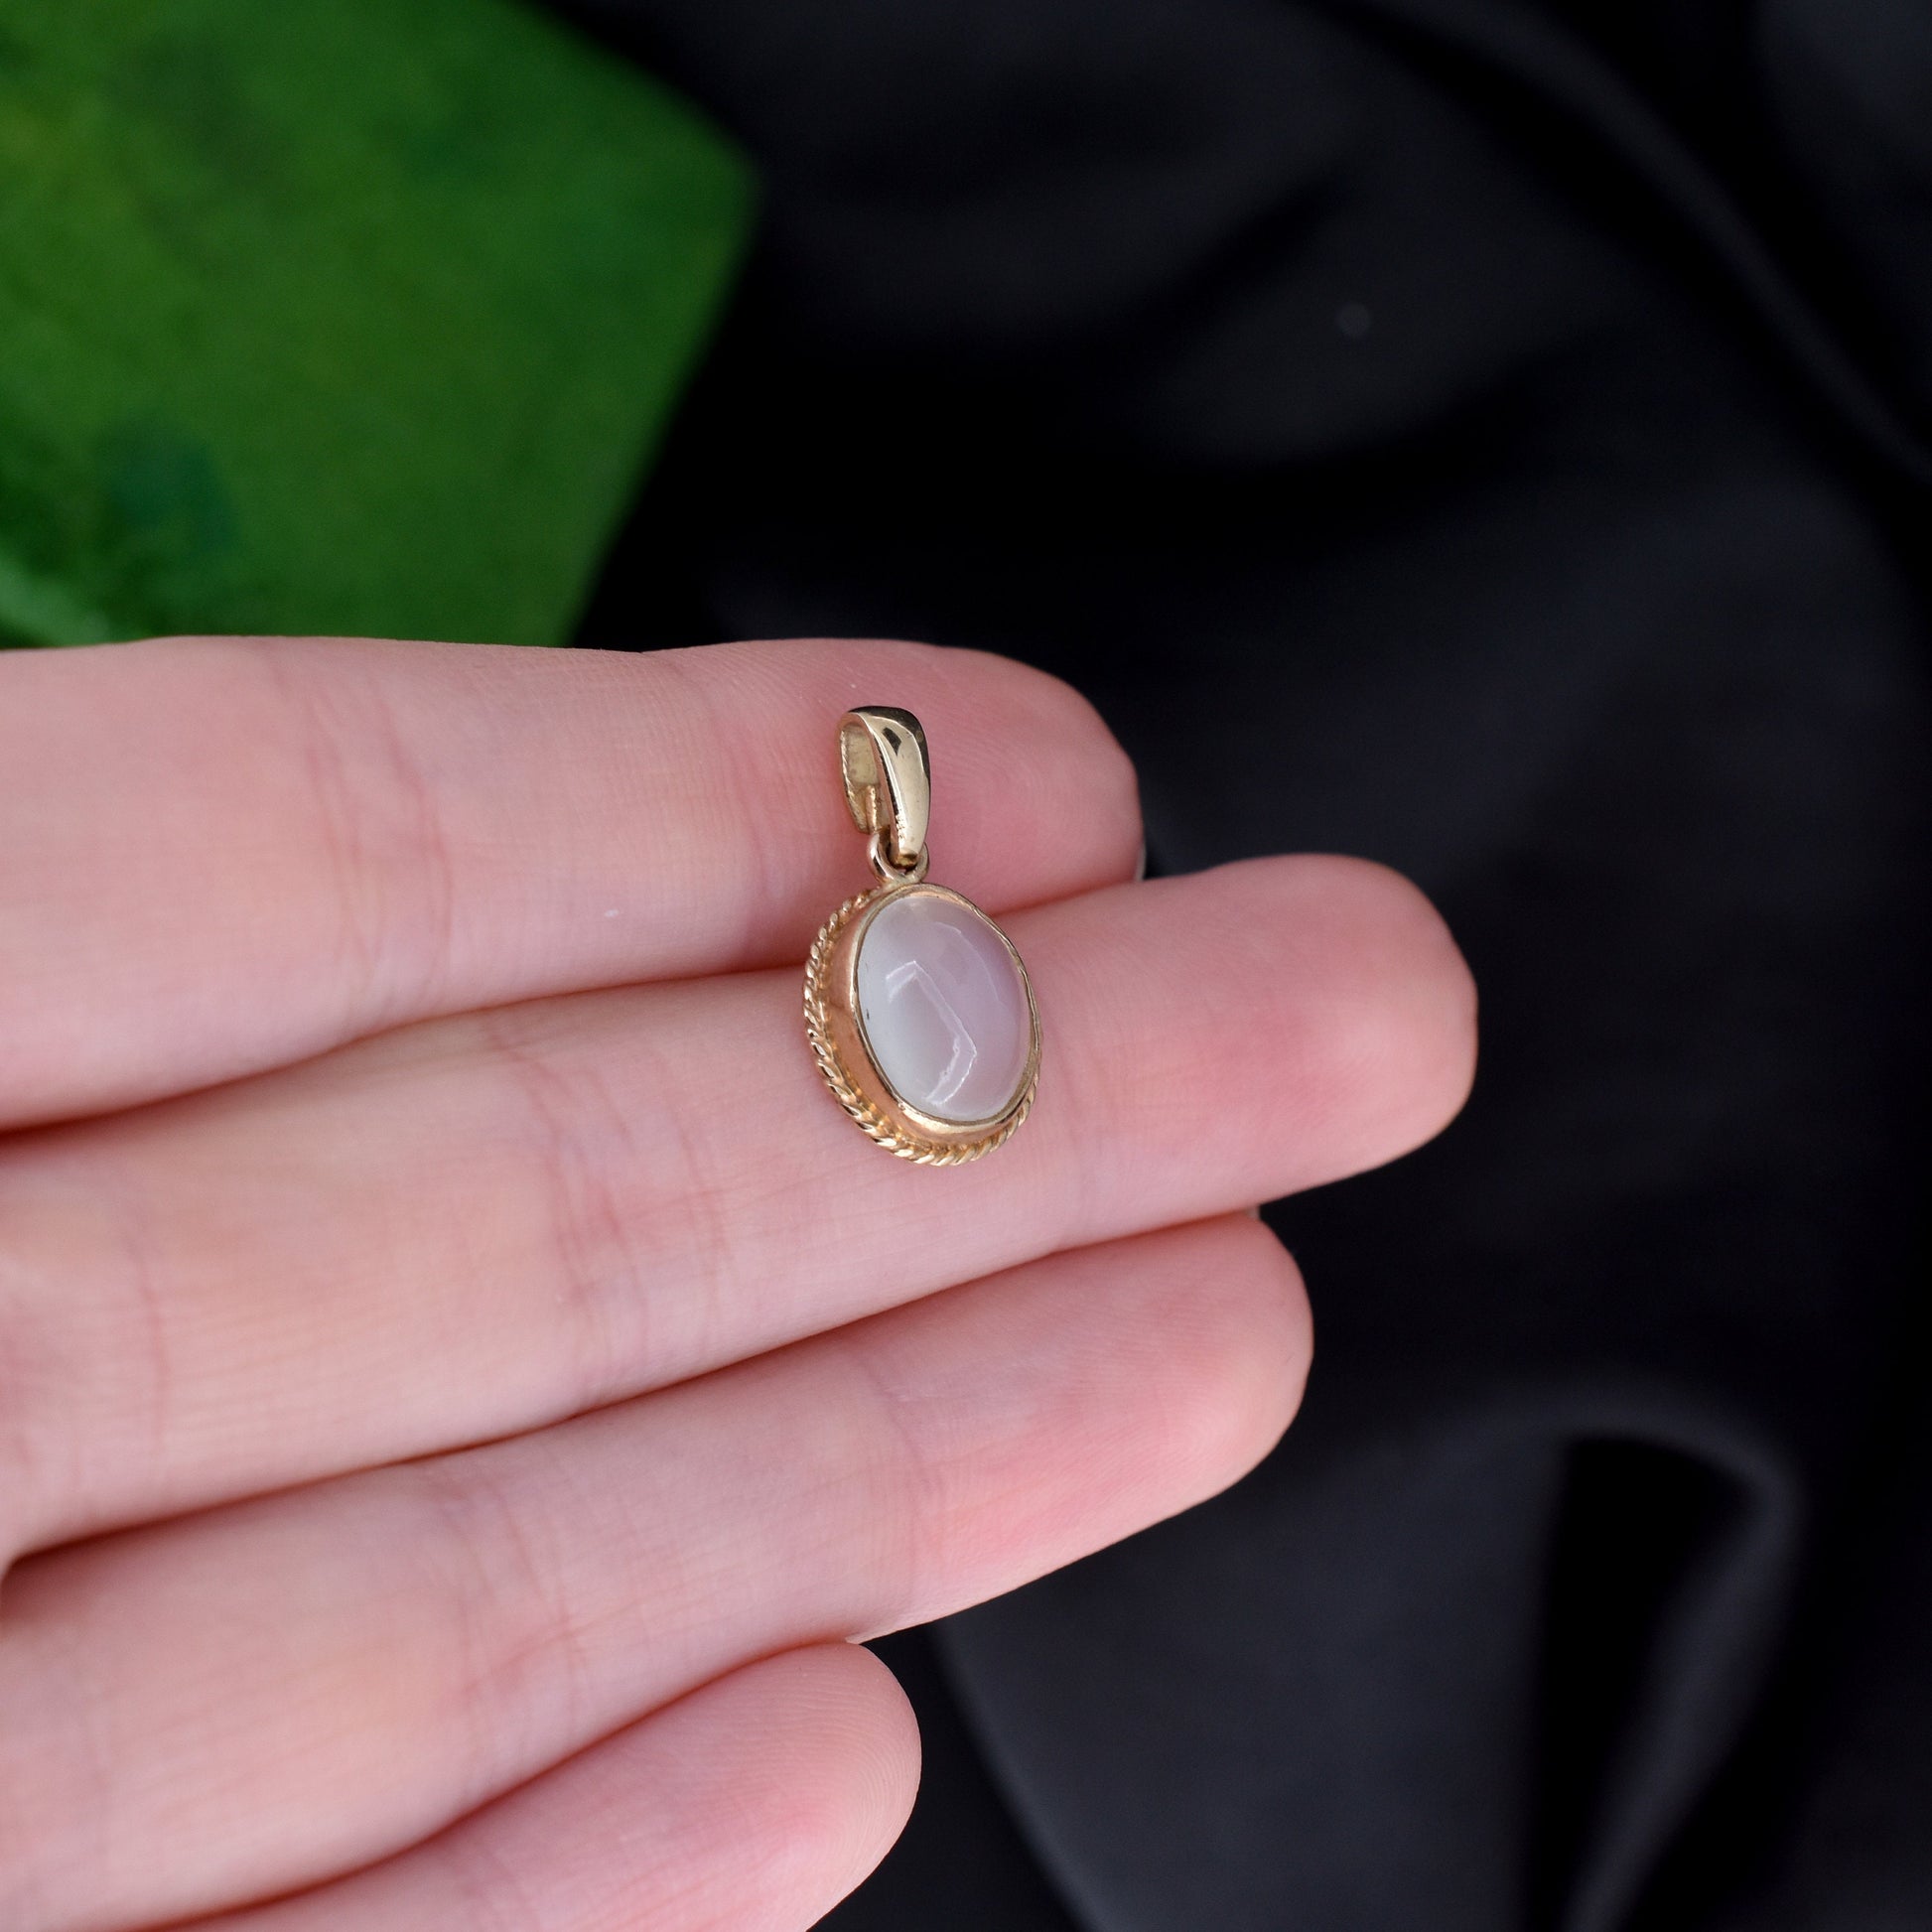 Cabochon Moonstone 9ct Yellow Gold Oval Pendant Charm